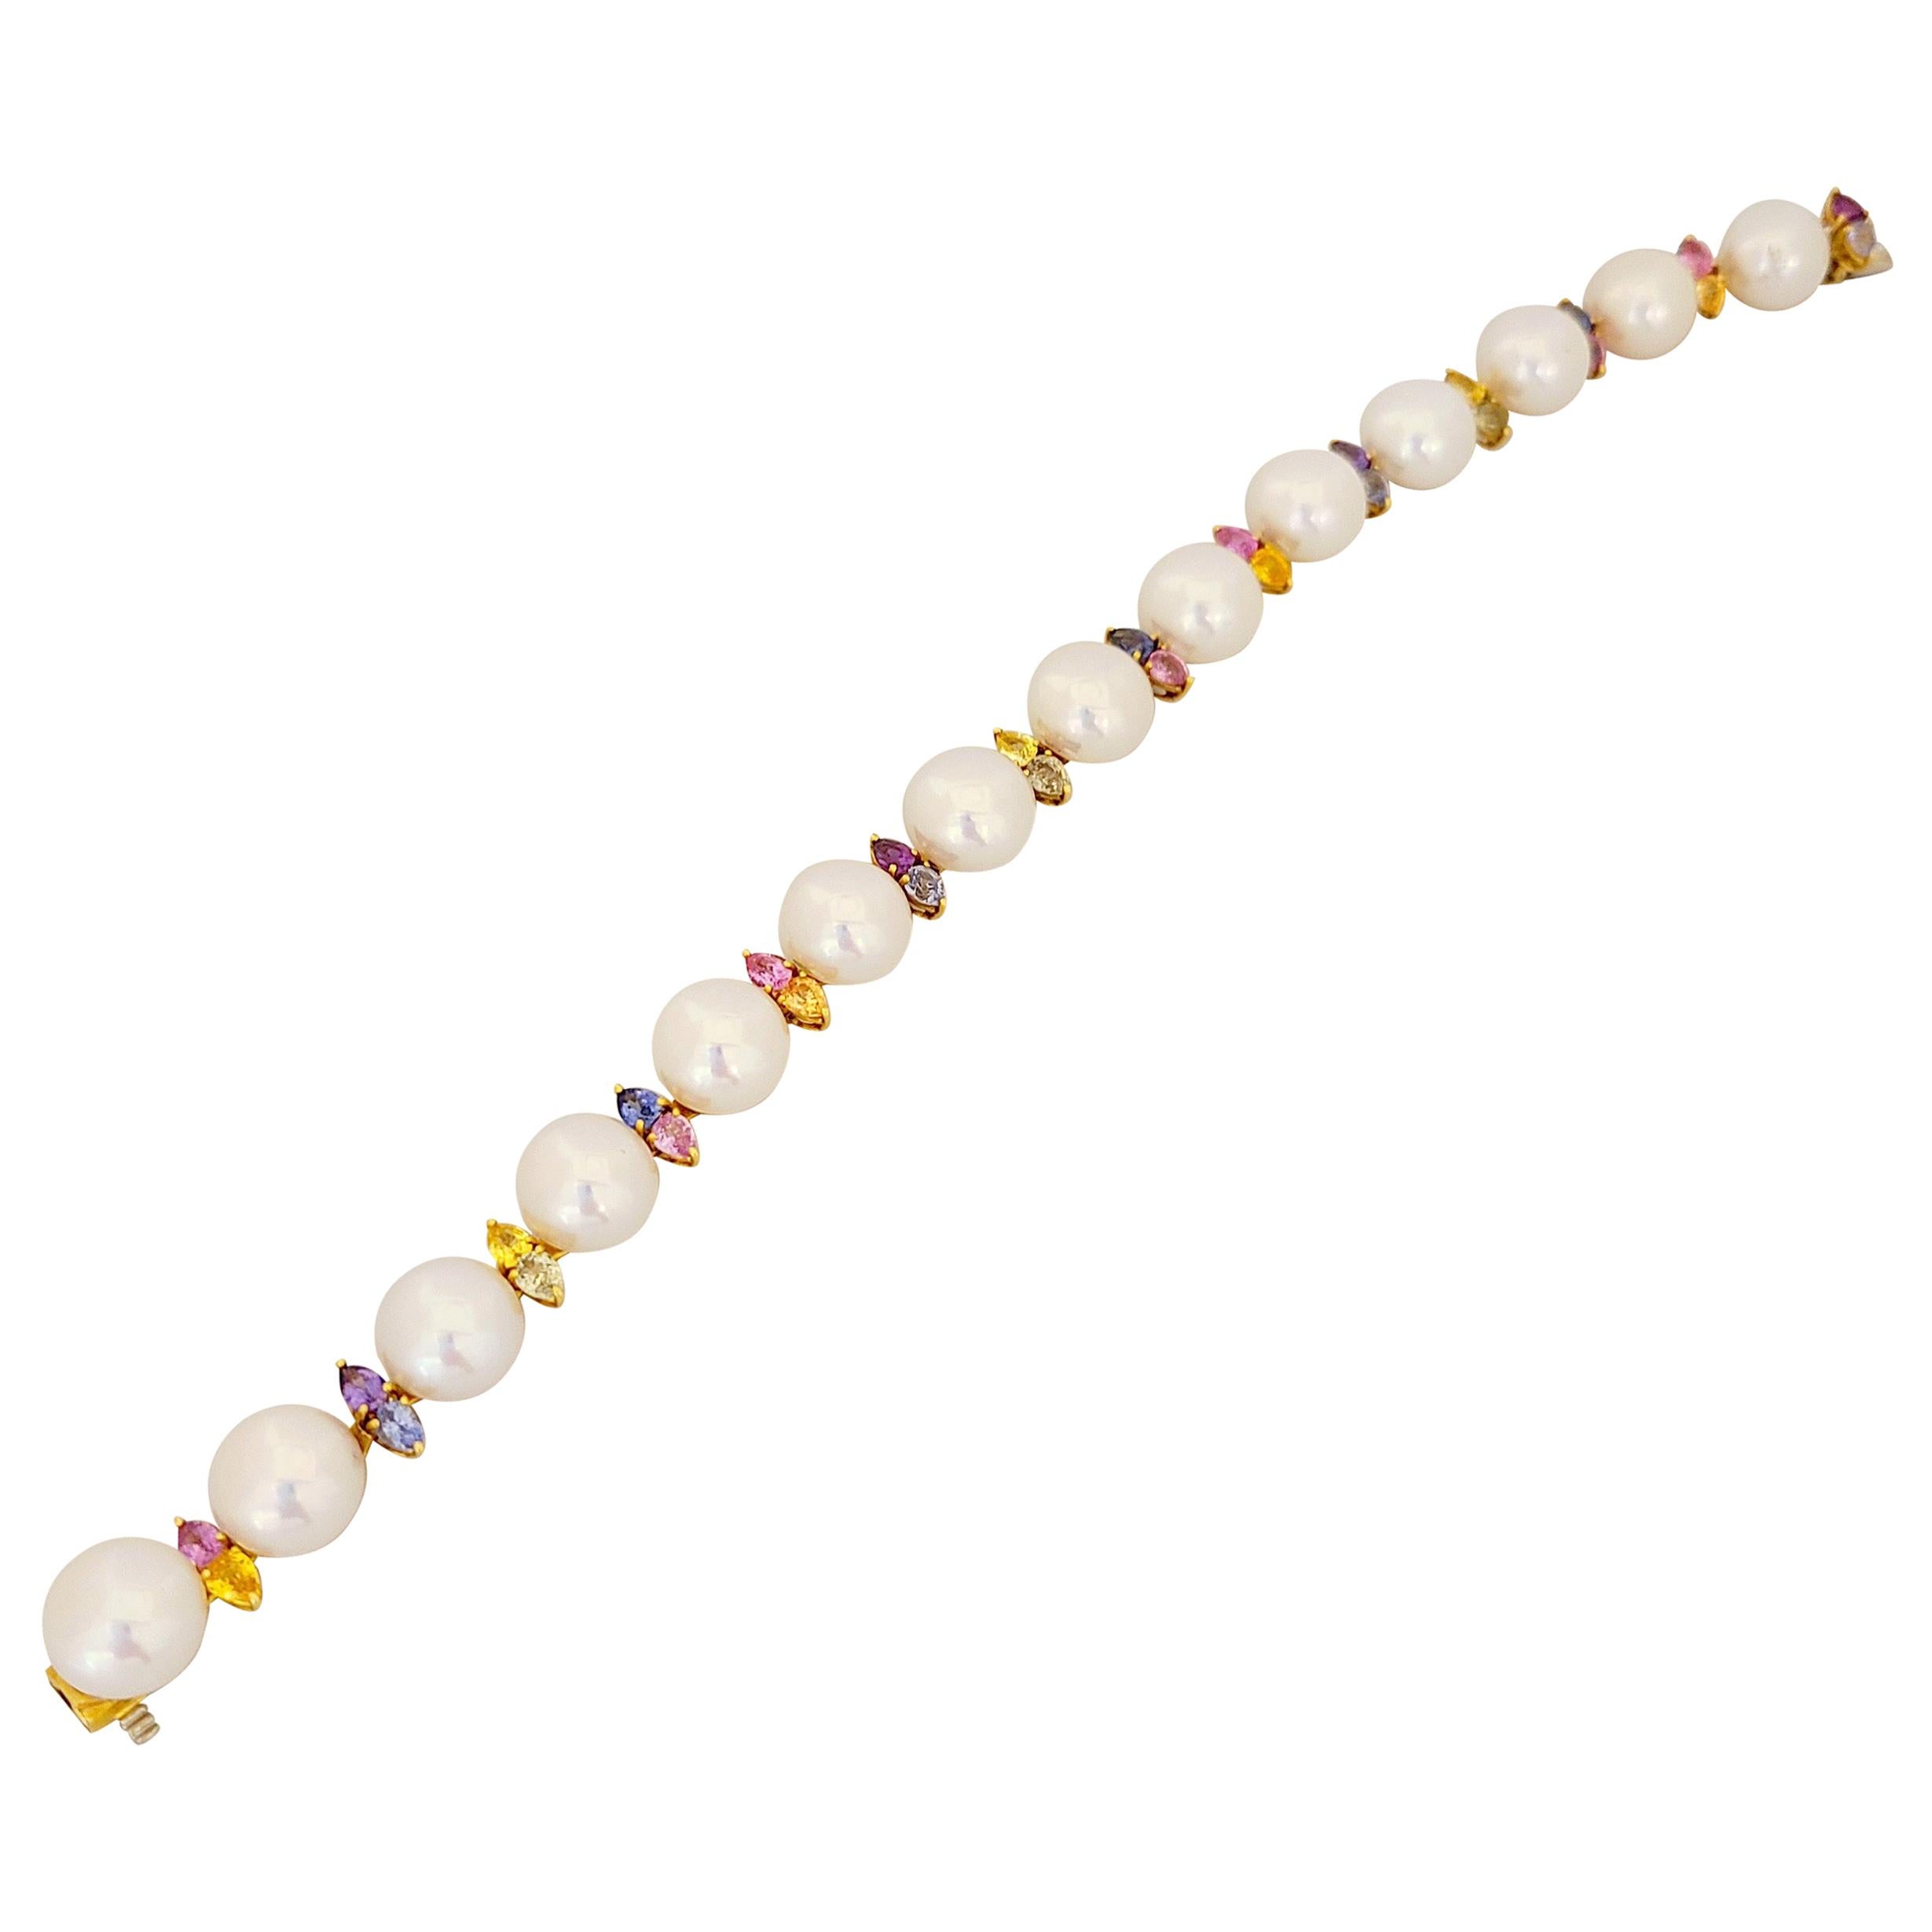 Schoeffel 18KT Y Gold Freshwater Pearl Bracelet with Multicolored Pear Sapphires